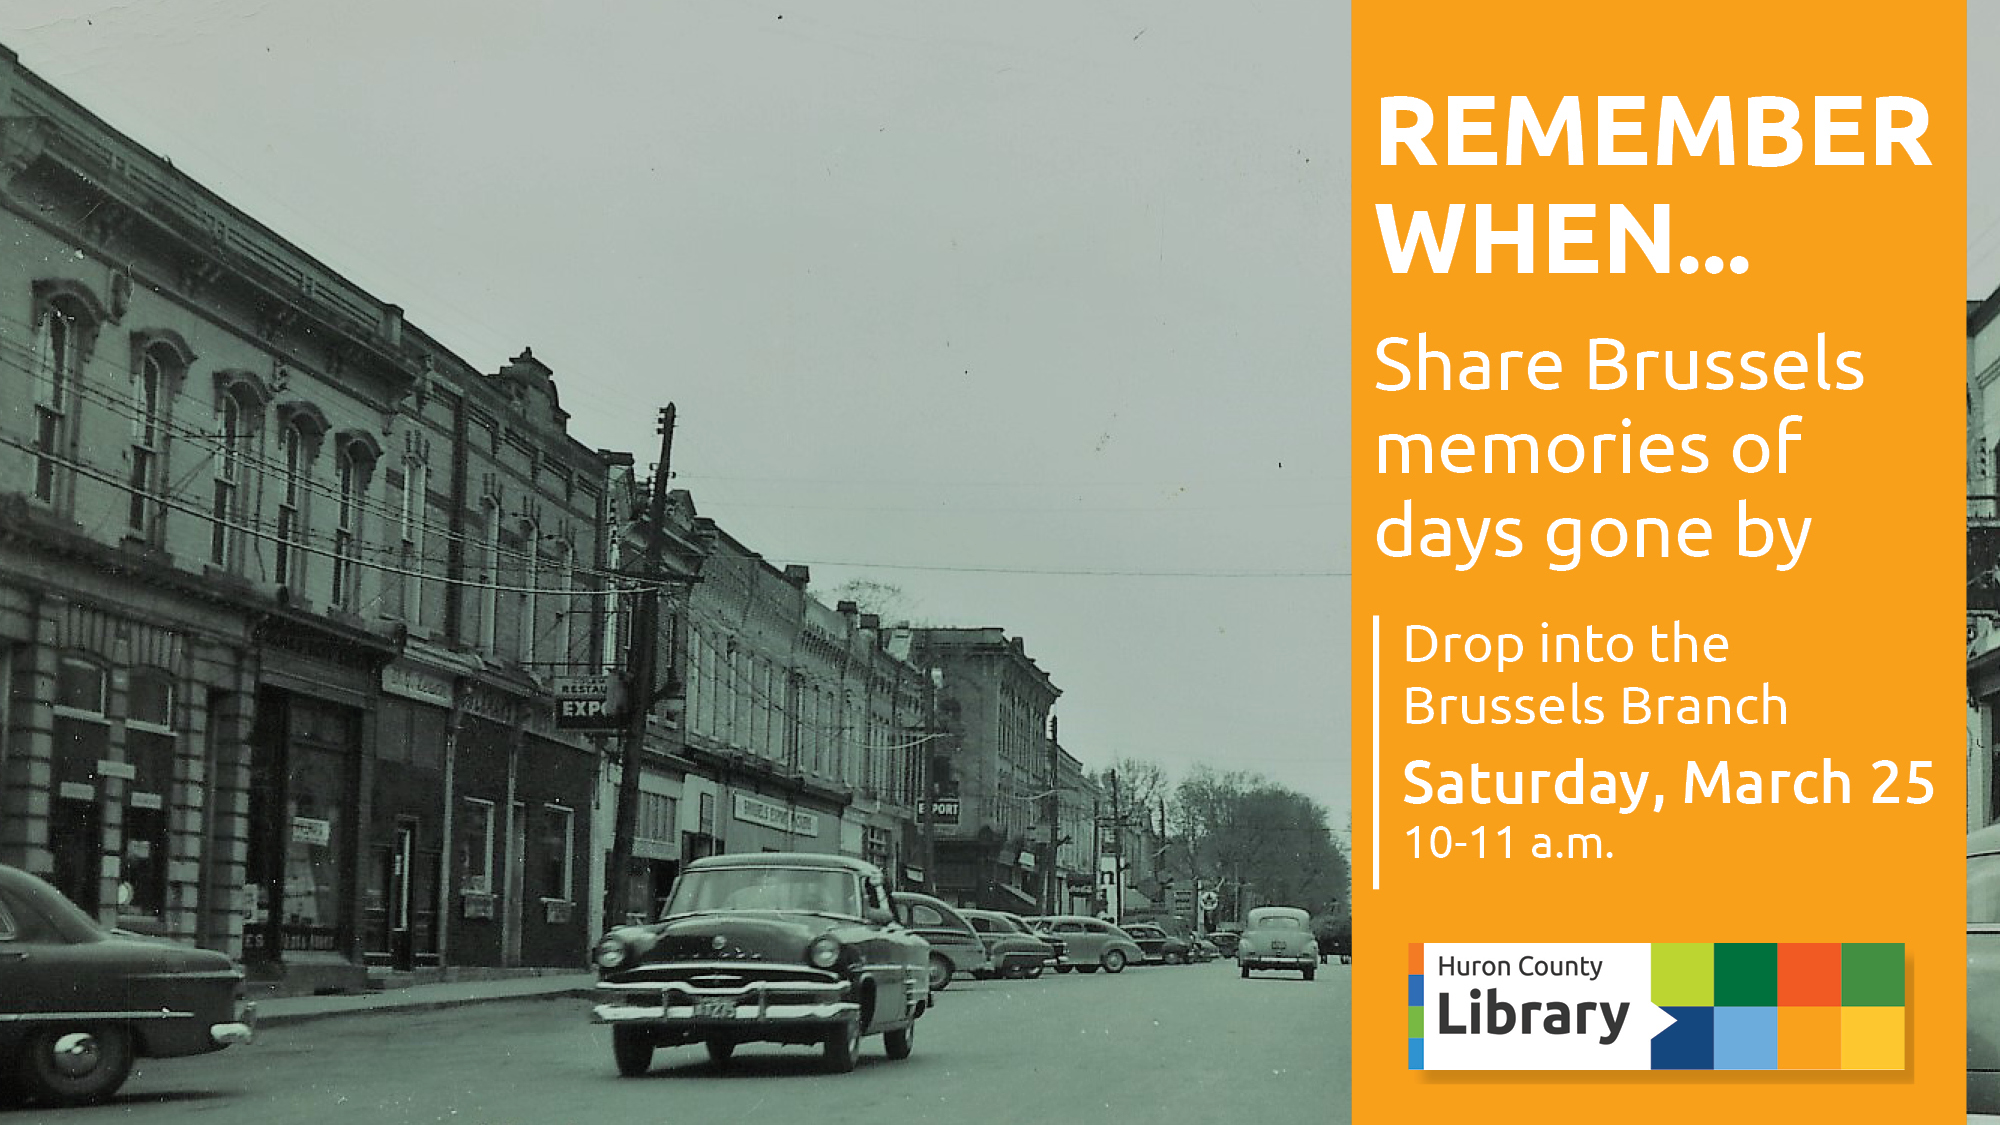 Historic image of downtown Brussels from the early 1950s. Text promoted remember when event at the Brussels Branch.